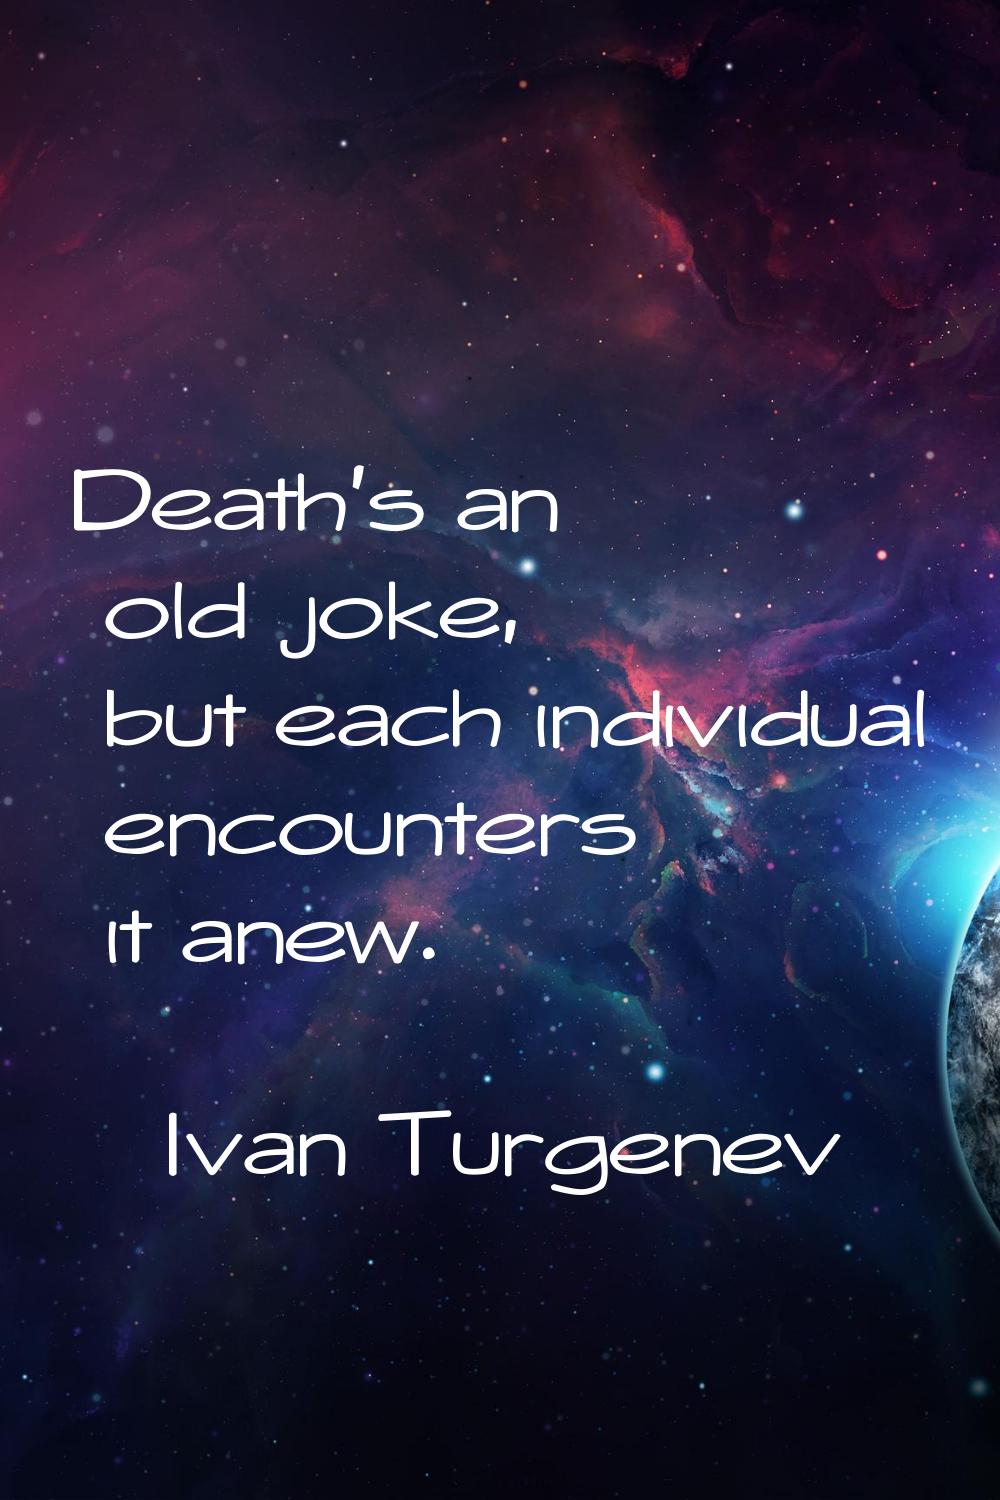 Death's an old joke, but each individual encounters it anew.